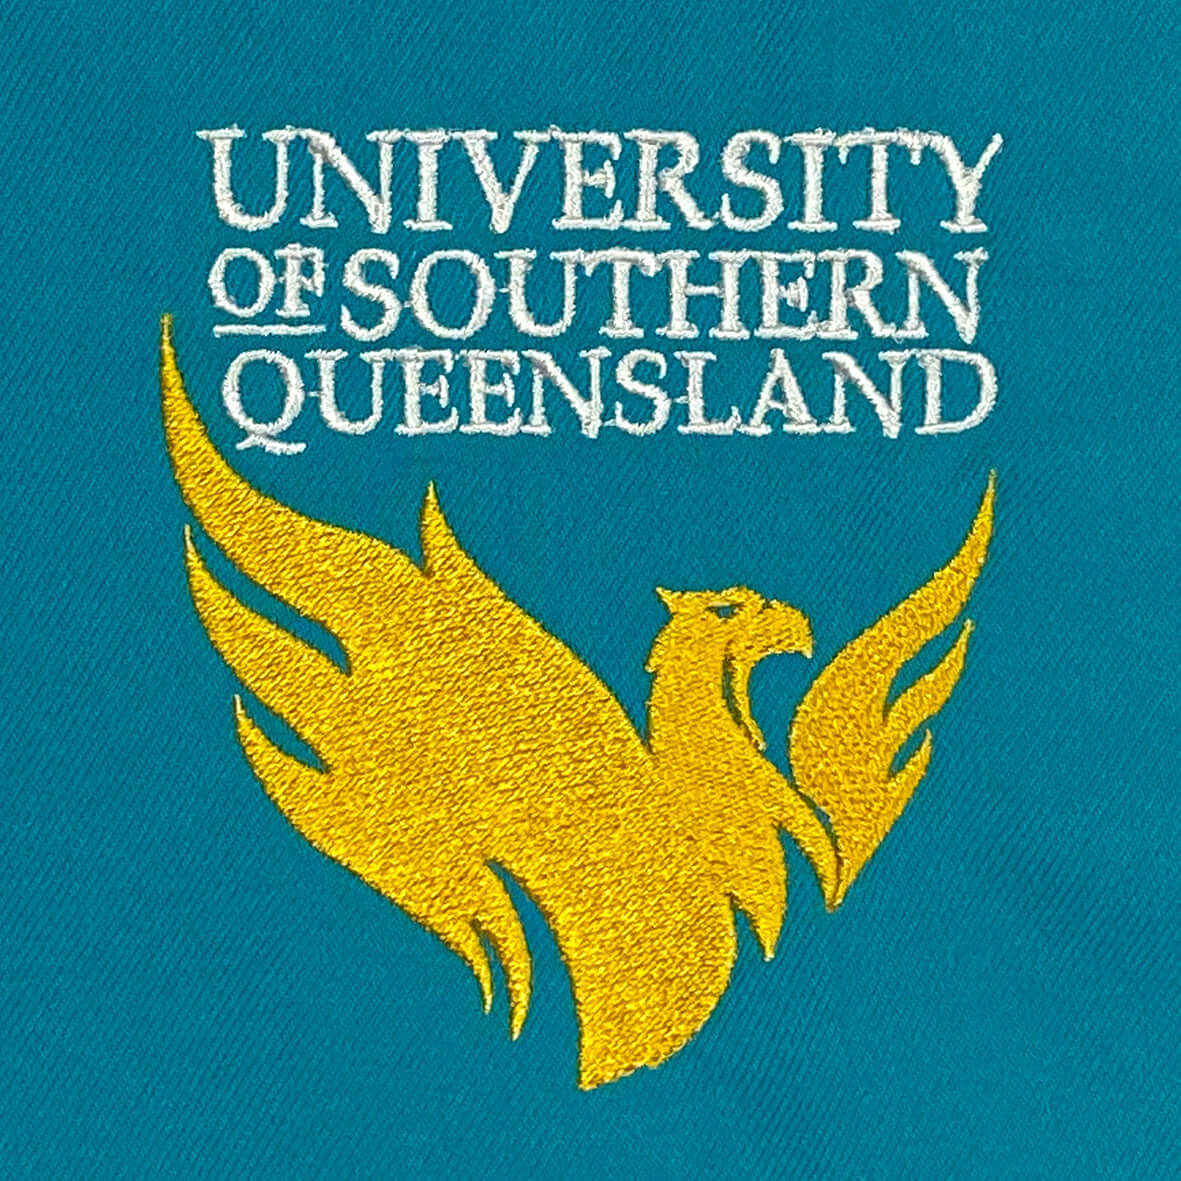 Embroidery Stock Logos - University of Southern Queensland